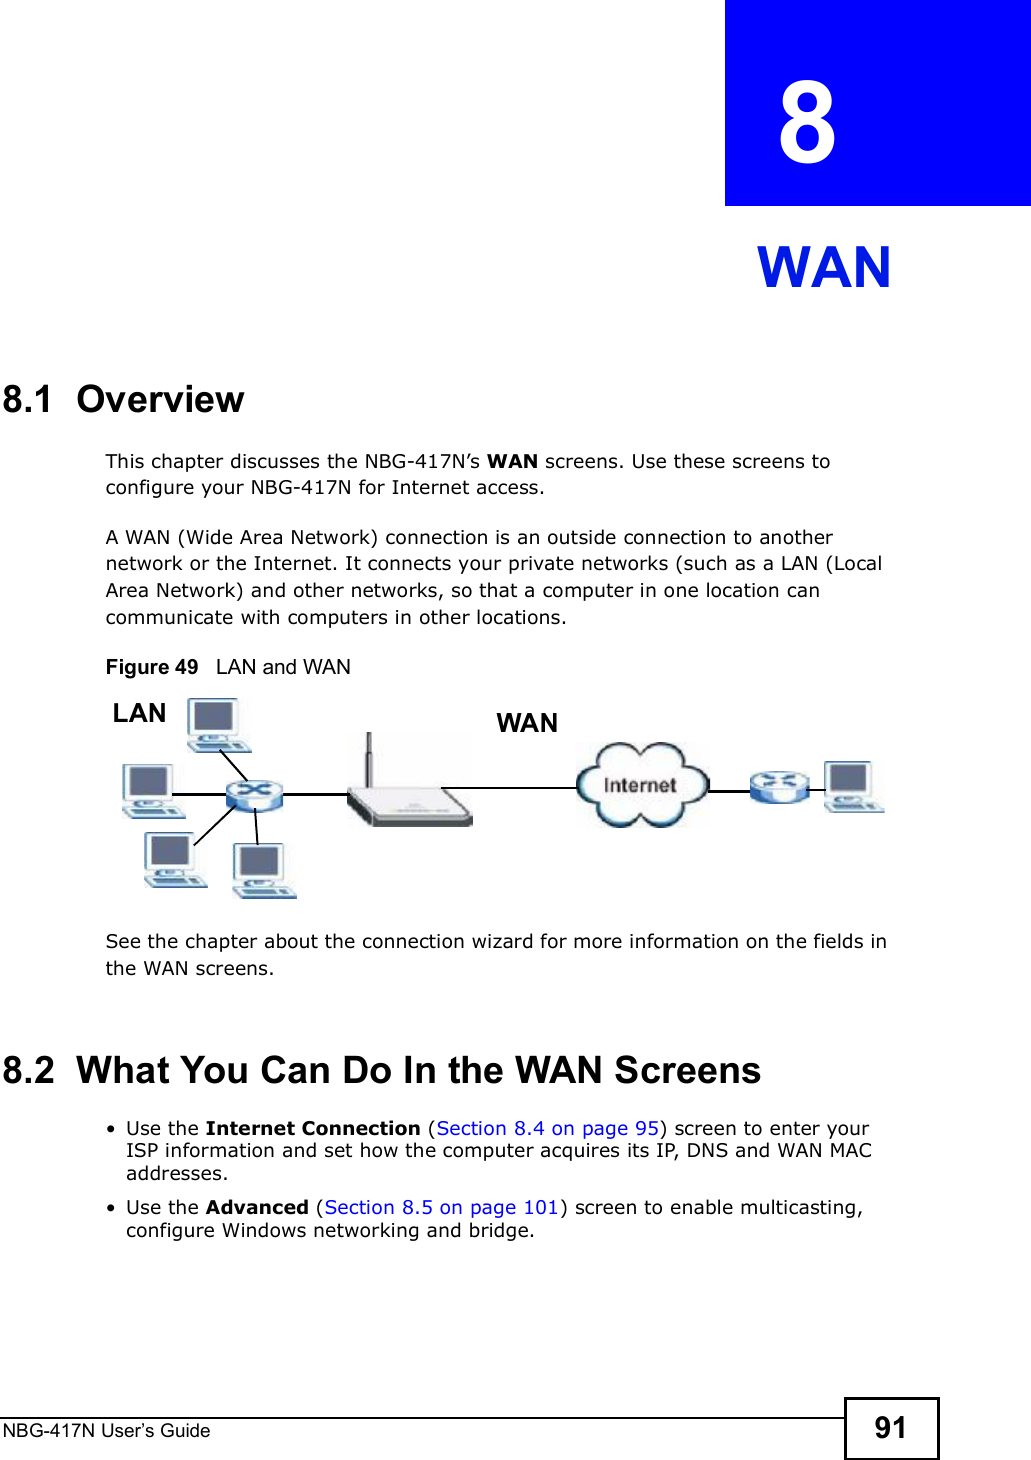 NBG-417N User s Guide 91CHAPTER  8 WAN8.1  OverviewThis chapter discusses the NBG-417N!s WAN screens. Use these screens to configure your NBG-417N for Internet access.A WAN (Wide Area Network) connection is an outside connection to another network or the Internet. It connects your private networks (such as a LAN (Local Area Network) and other networks, so that a computer in one location can communicate with computers in other locations.Figure 49   LAN and WANSee the chapter about the connection wizard for more information on the fields in the WAN screens.8.2  What You Can Do In the WAN Screens Use the Internet Connection (Section 8.4 on page 95) screen to enter your ISP information and set how the computer acquires its IP, DNS and WAN MAC addresses. Use the Advanced (Section 8.5 on page 101) screen to enable multicasting, configure Windows networking and bridge.WANLAN